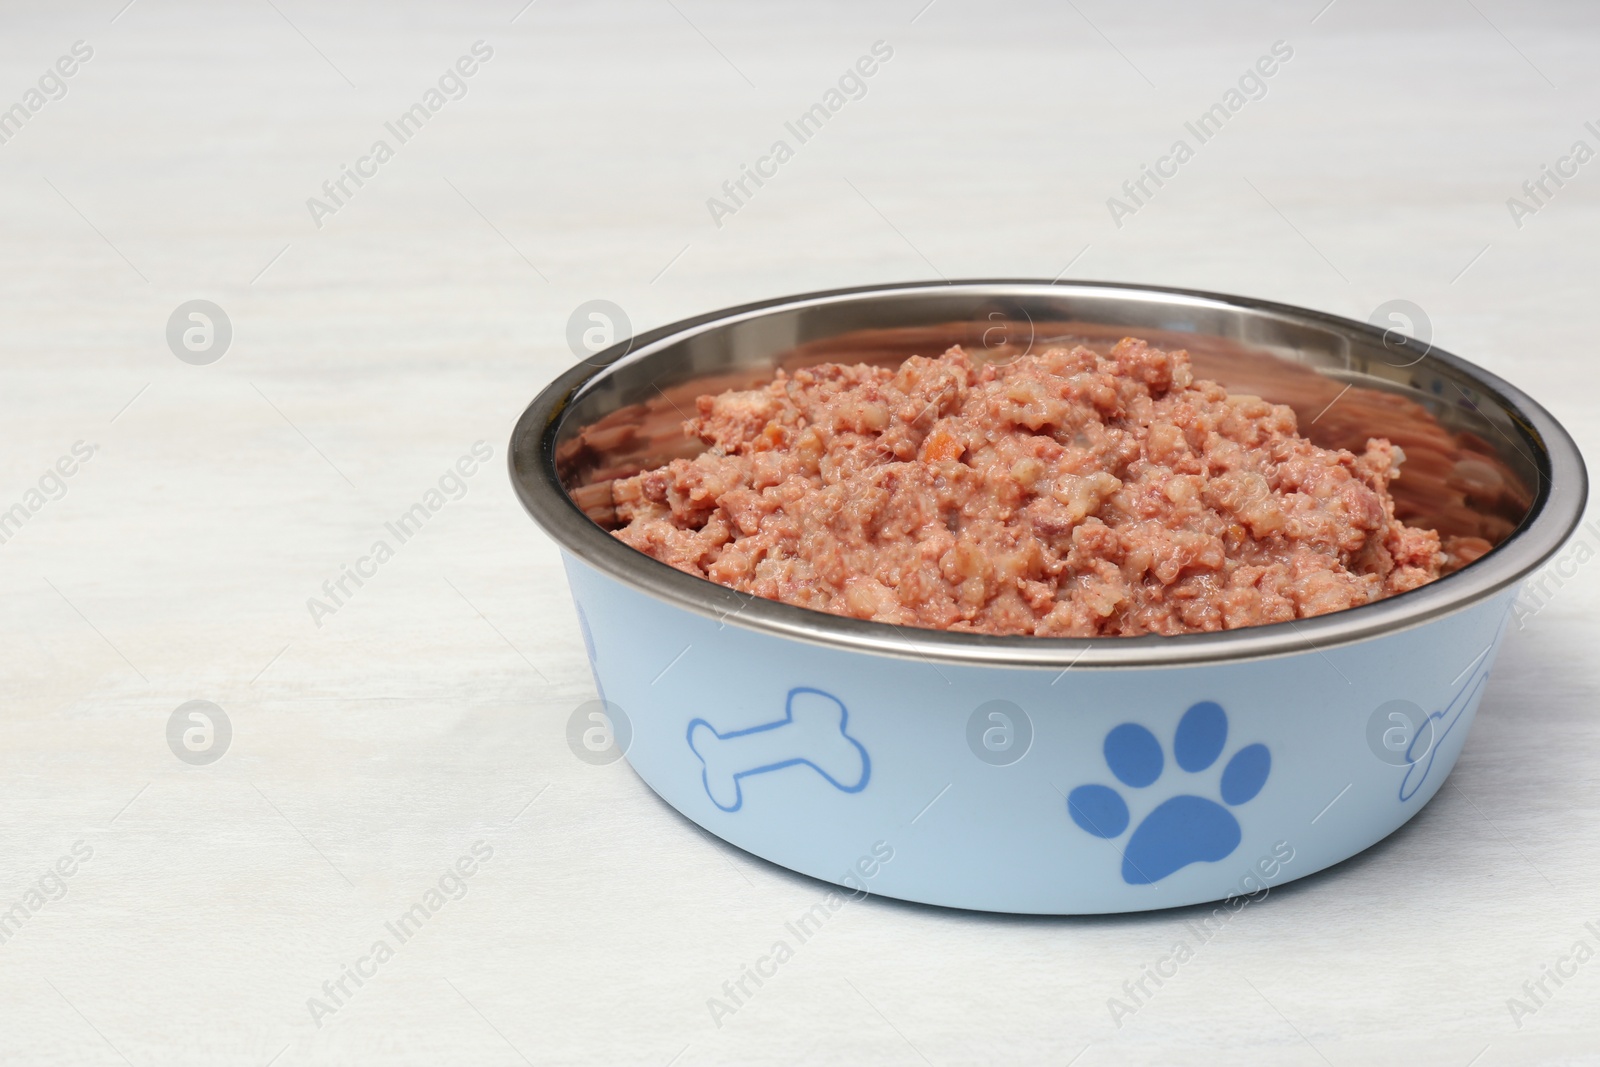 Photo of Wet pet food in feeding bowl on white table